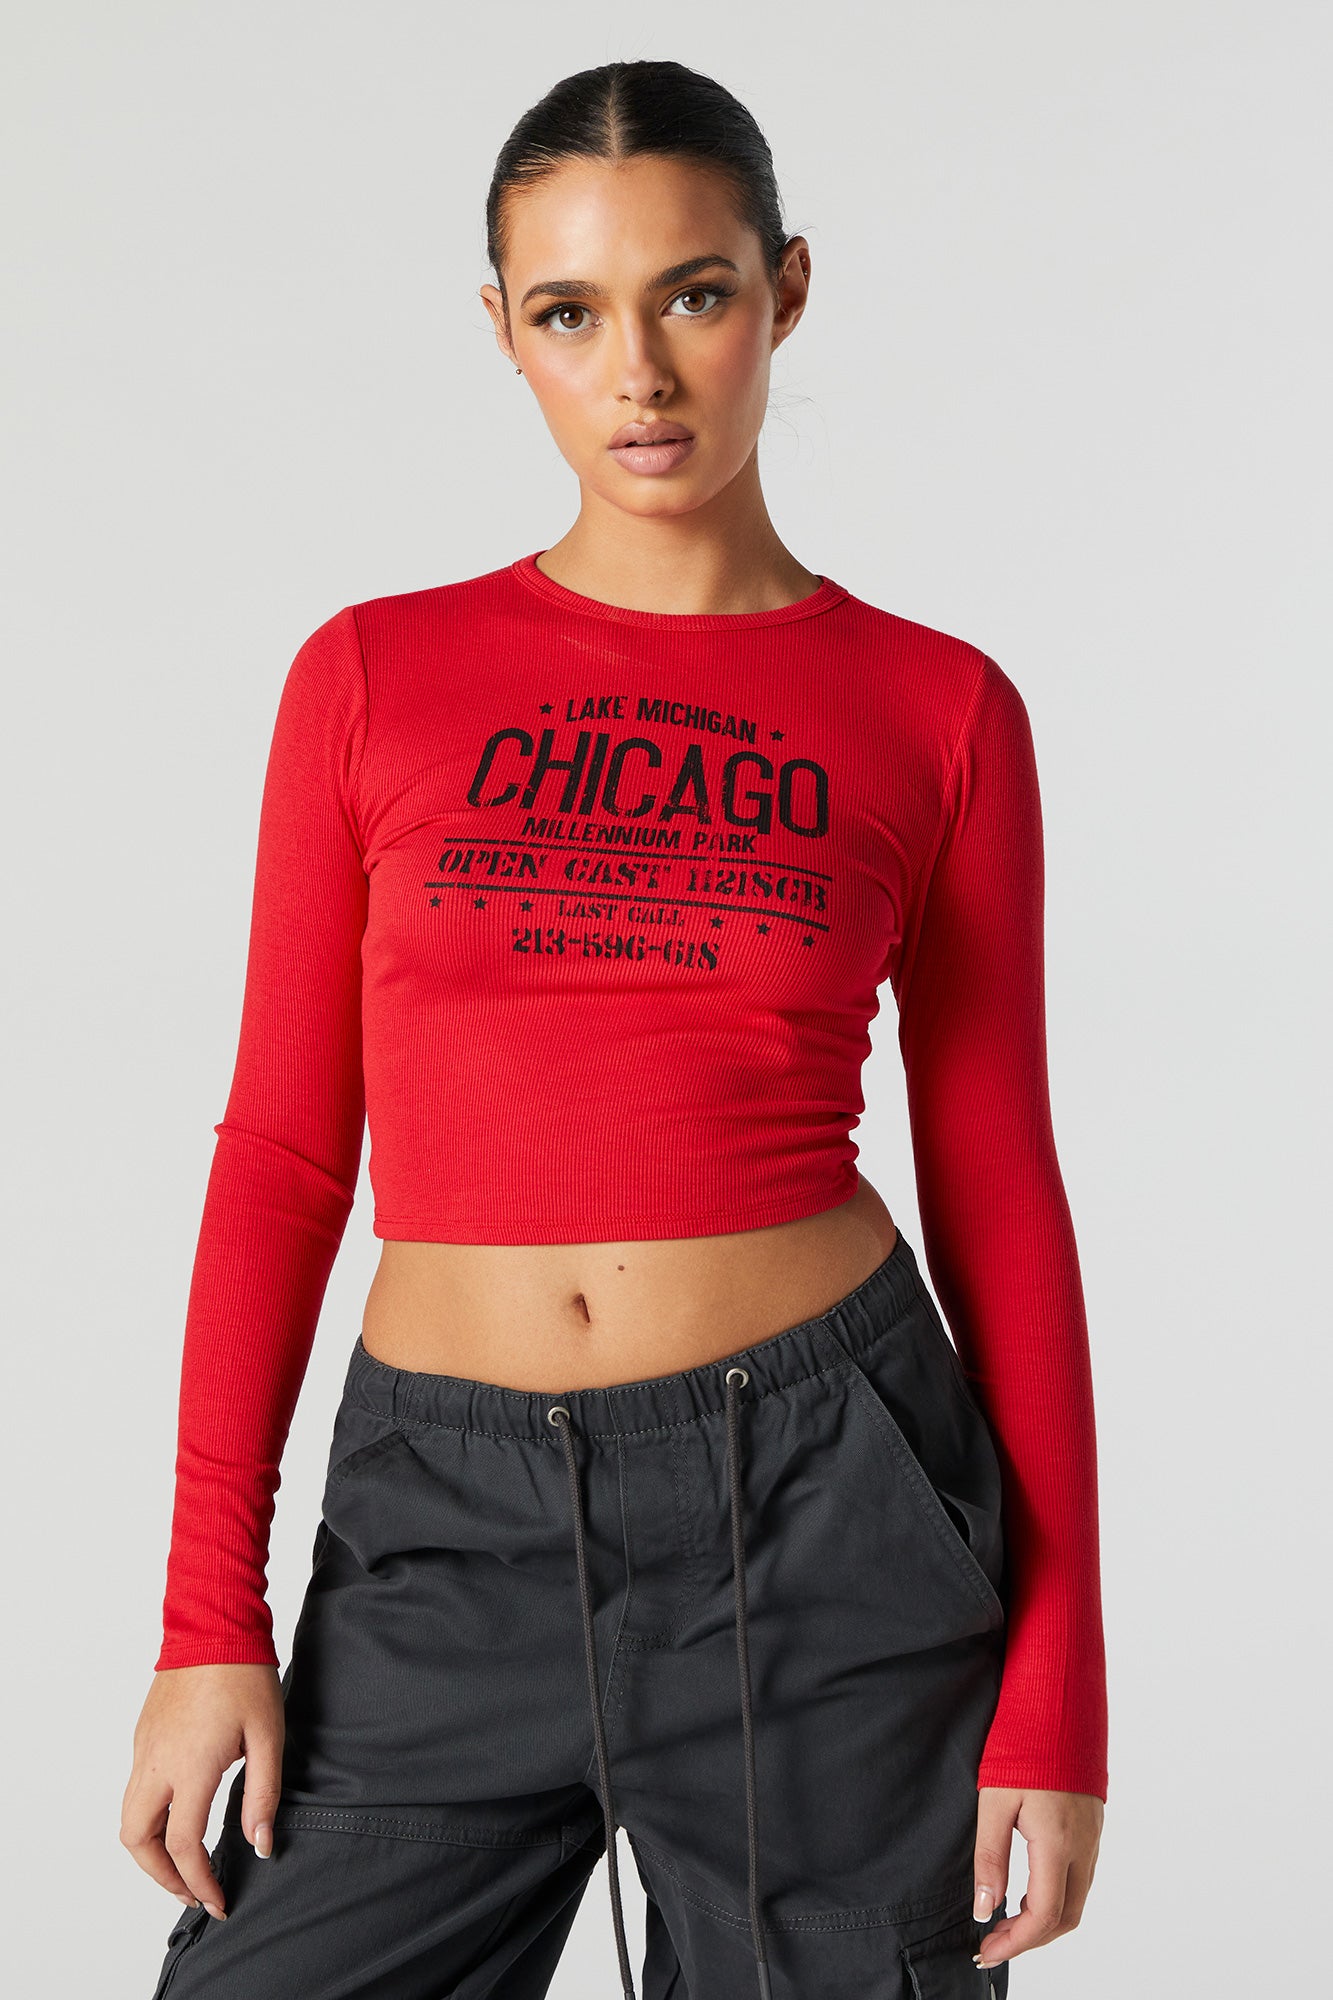 Chicago Graphic Long Sleeve Crop Top